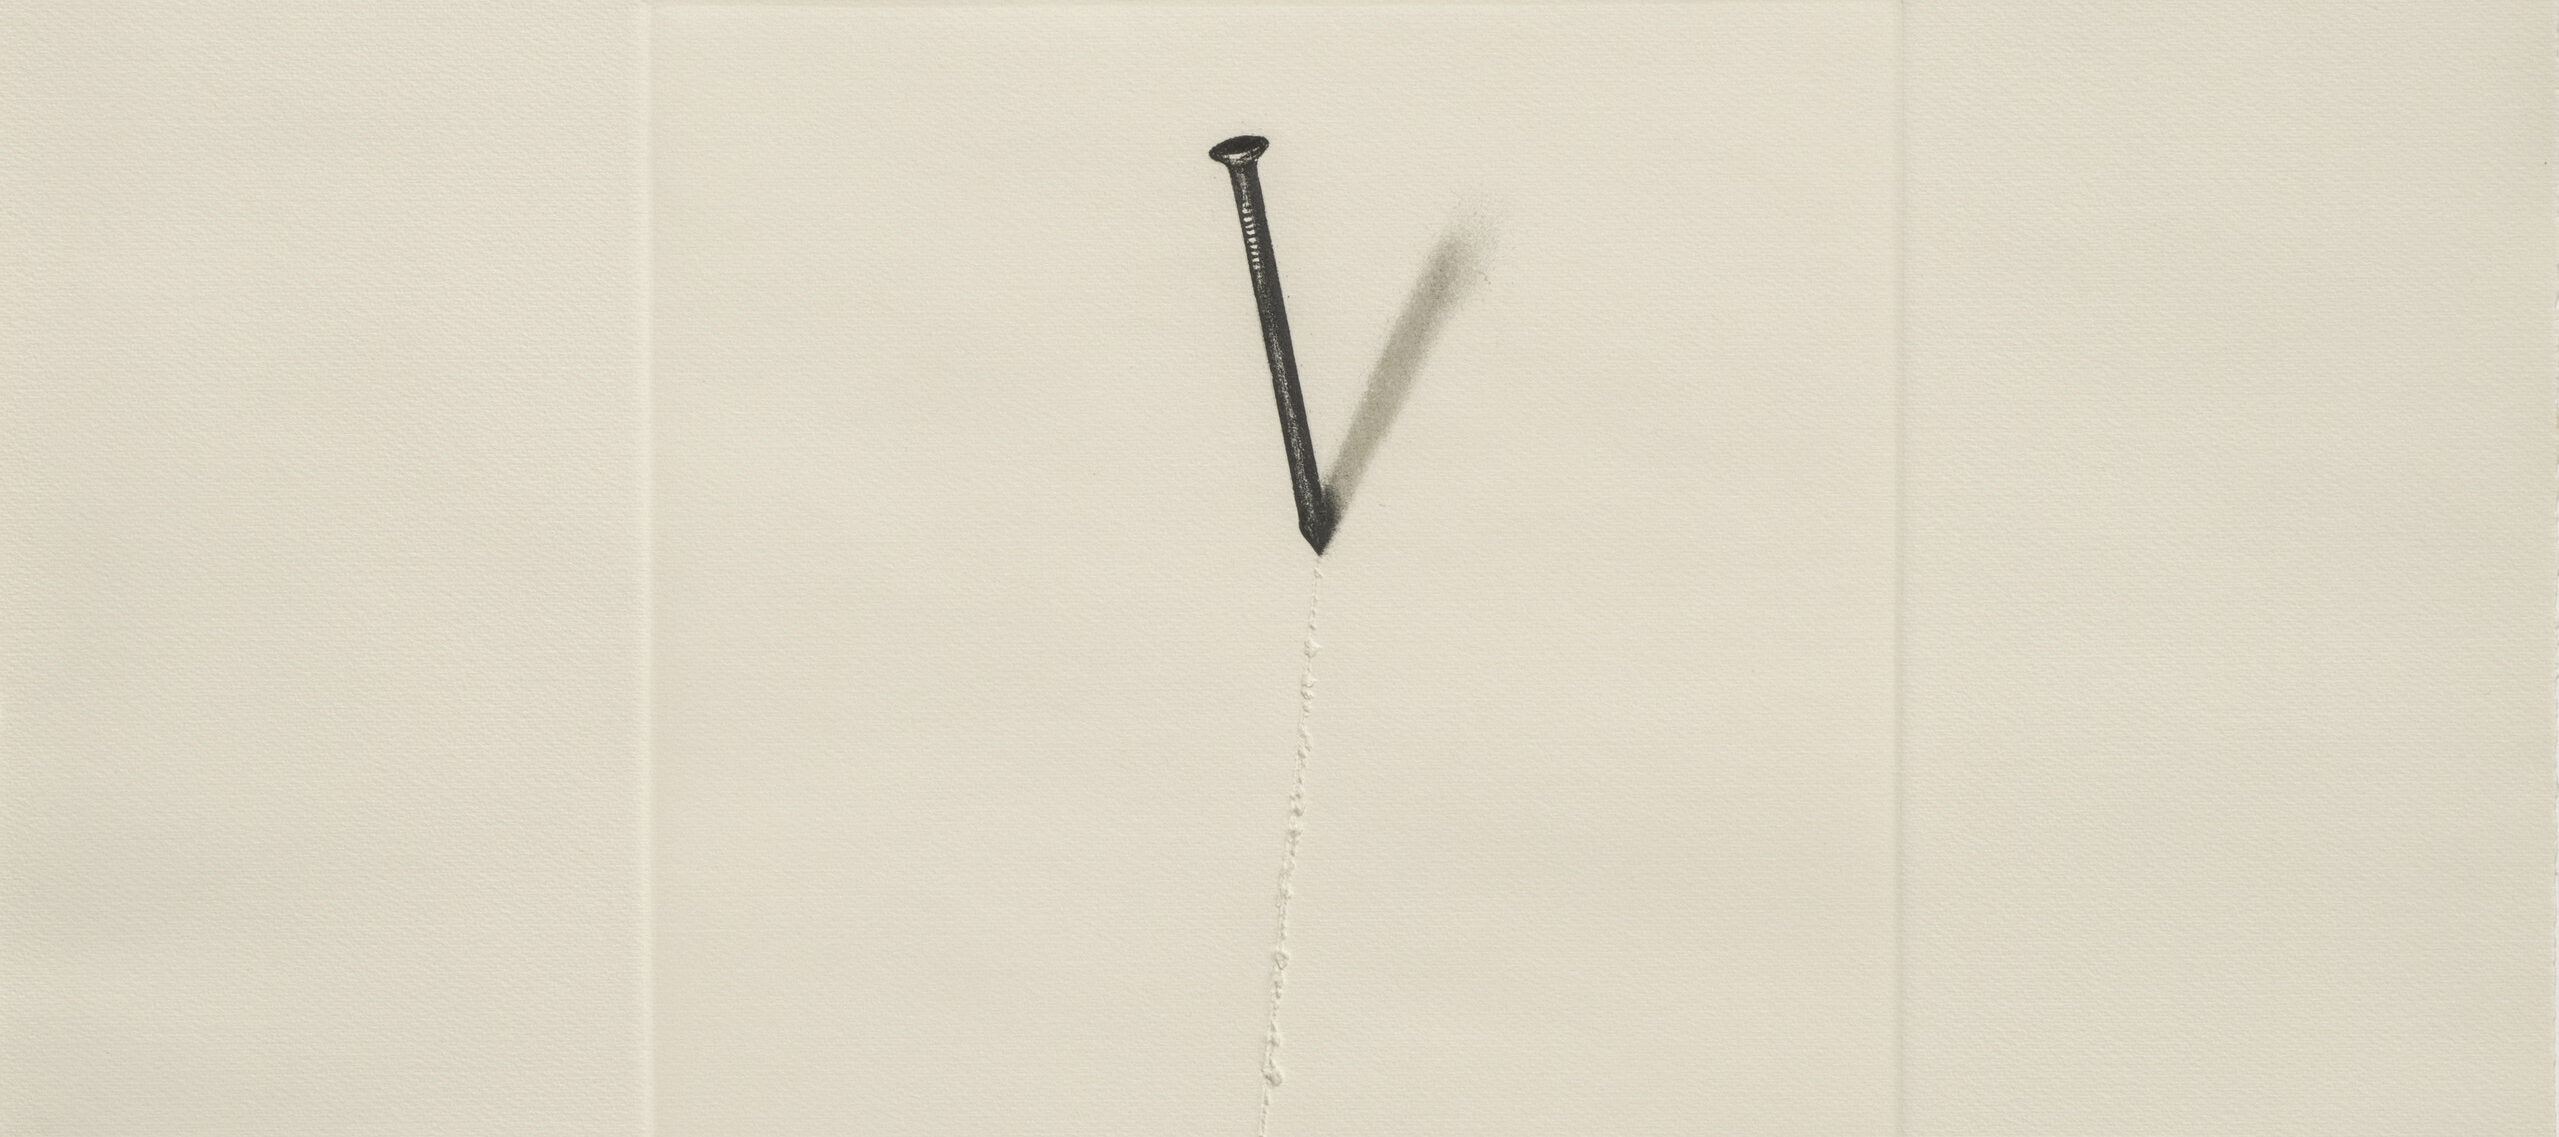 A gray nail sticking out of a white square on a white background. The nail sticks up and slightly to the left, hammered in at a high angle. A slight shadow of the nail appears on the right, and a long, subtle scratch stretches from the bottom border of the square up to the nail.